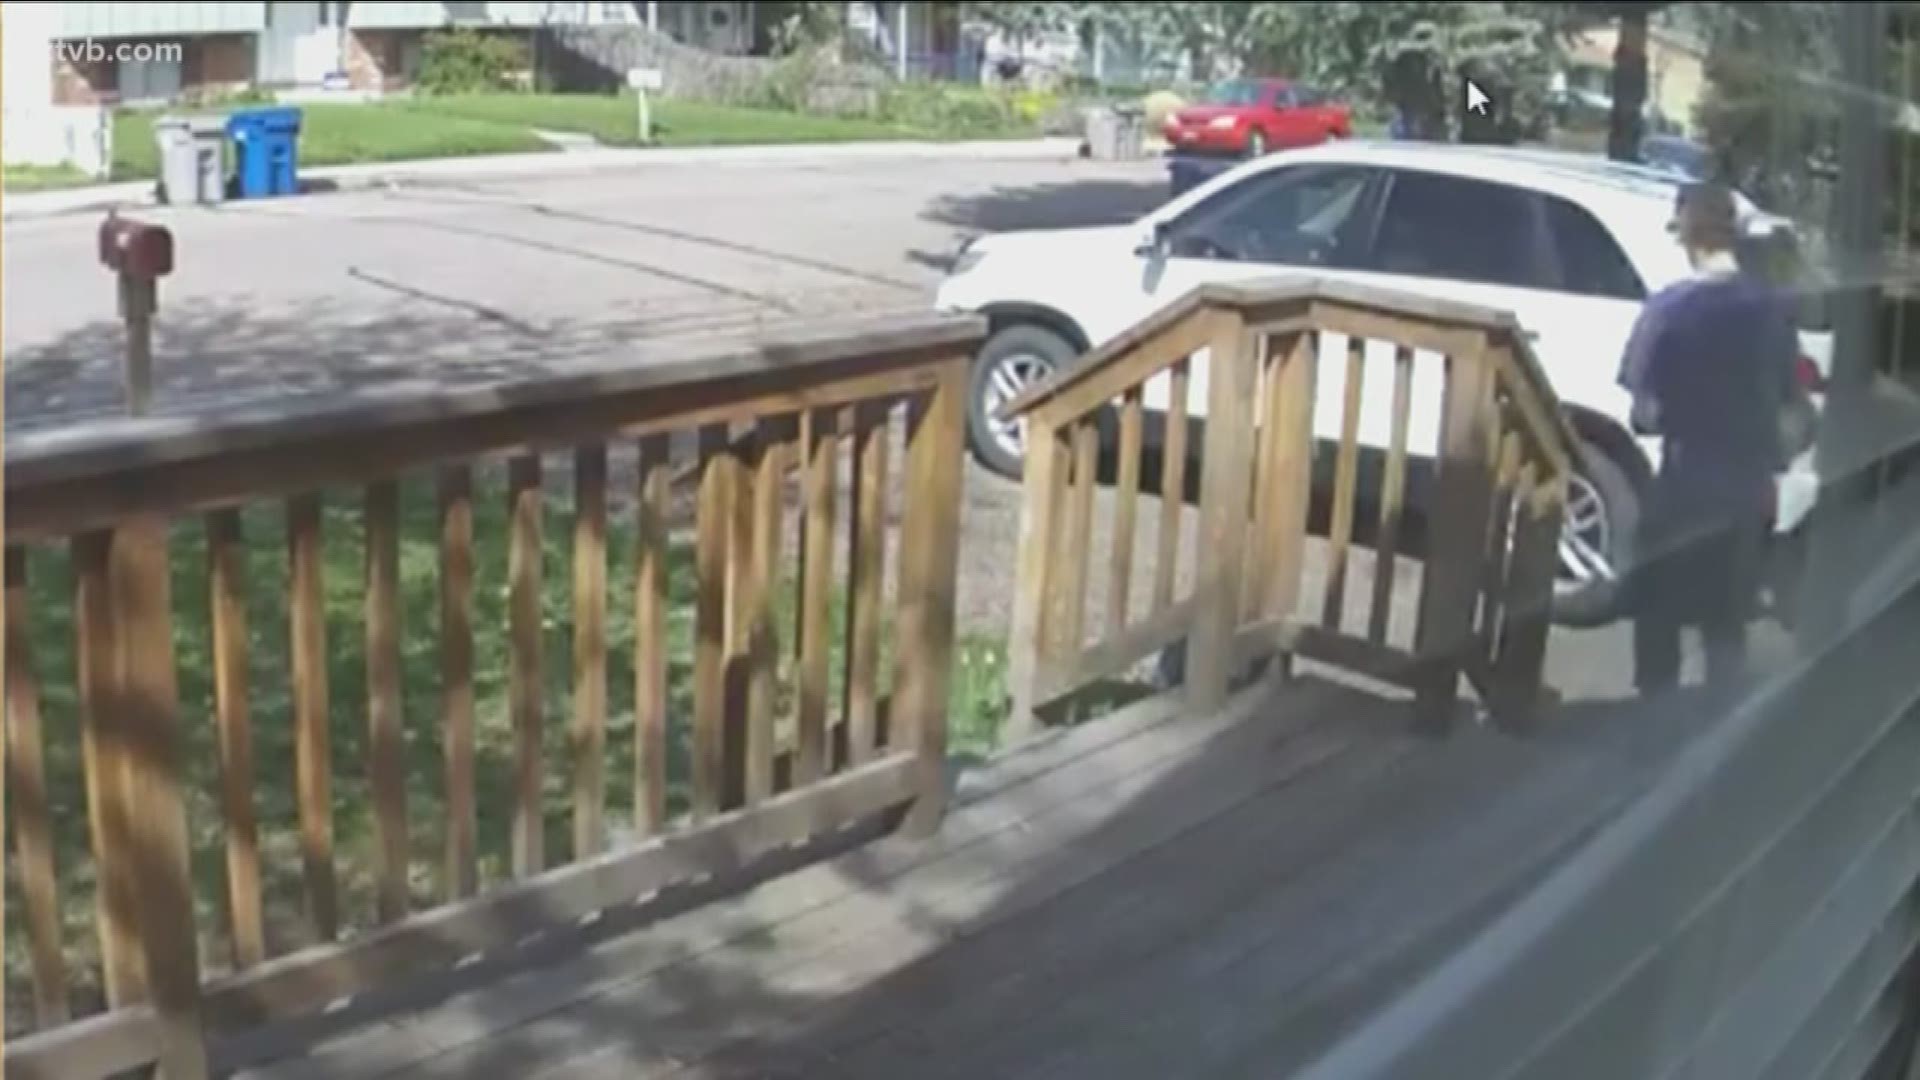 A family caught the porch pirate in the act on home video.